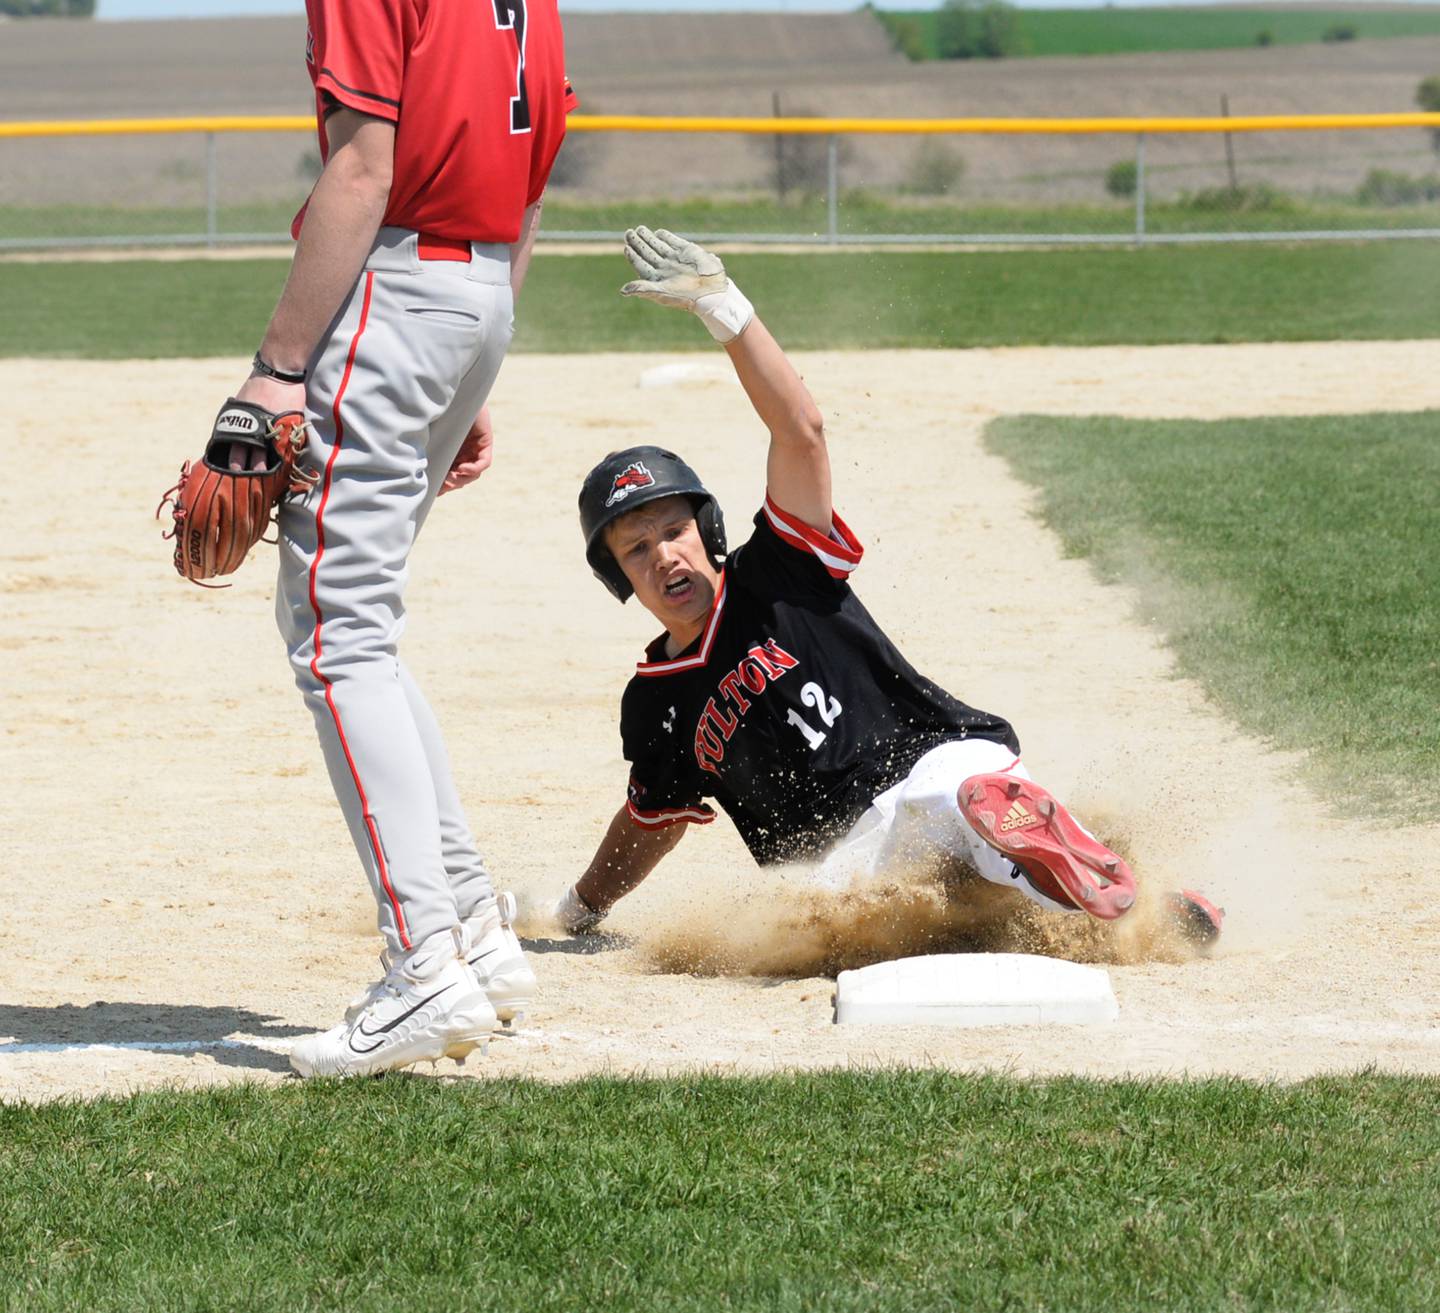 Fulton's Ryan Eads slides safely into third after hitting a triple against Forreston at the 1A Forreston Regional championship game on Saturday, May 20. The Steamers won the game 11-3 to advance to the Pearl City Sectional.